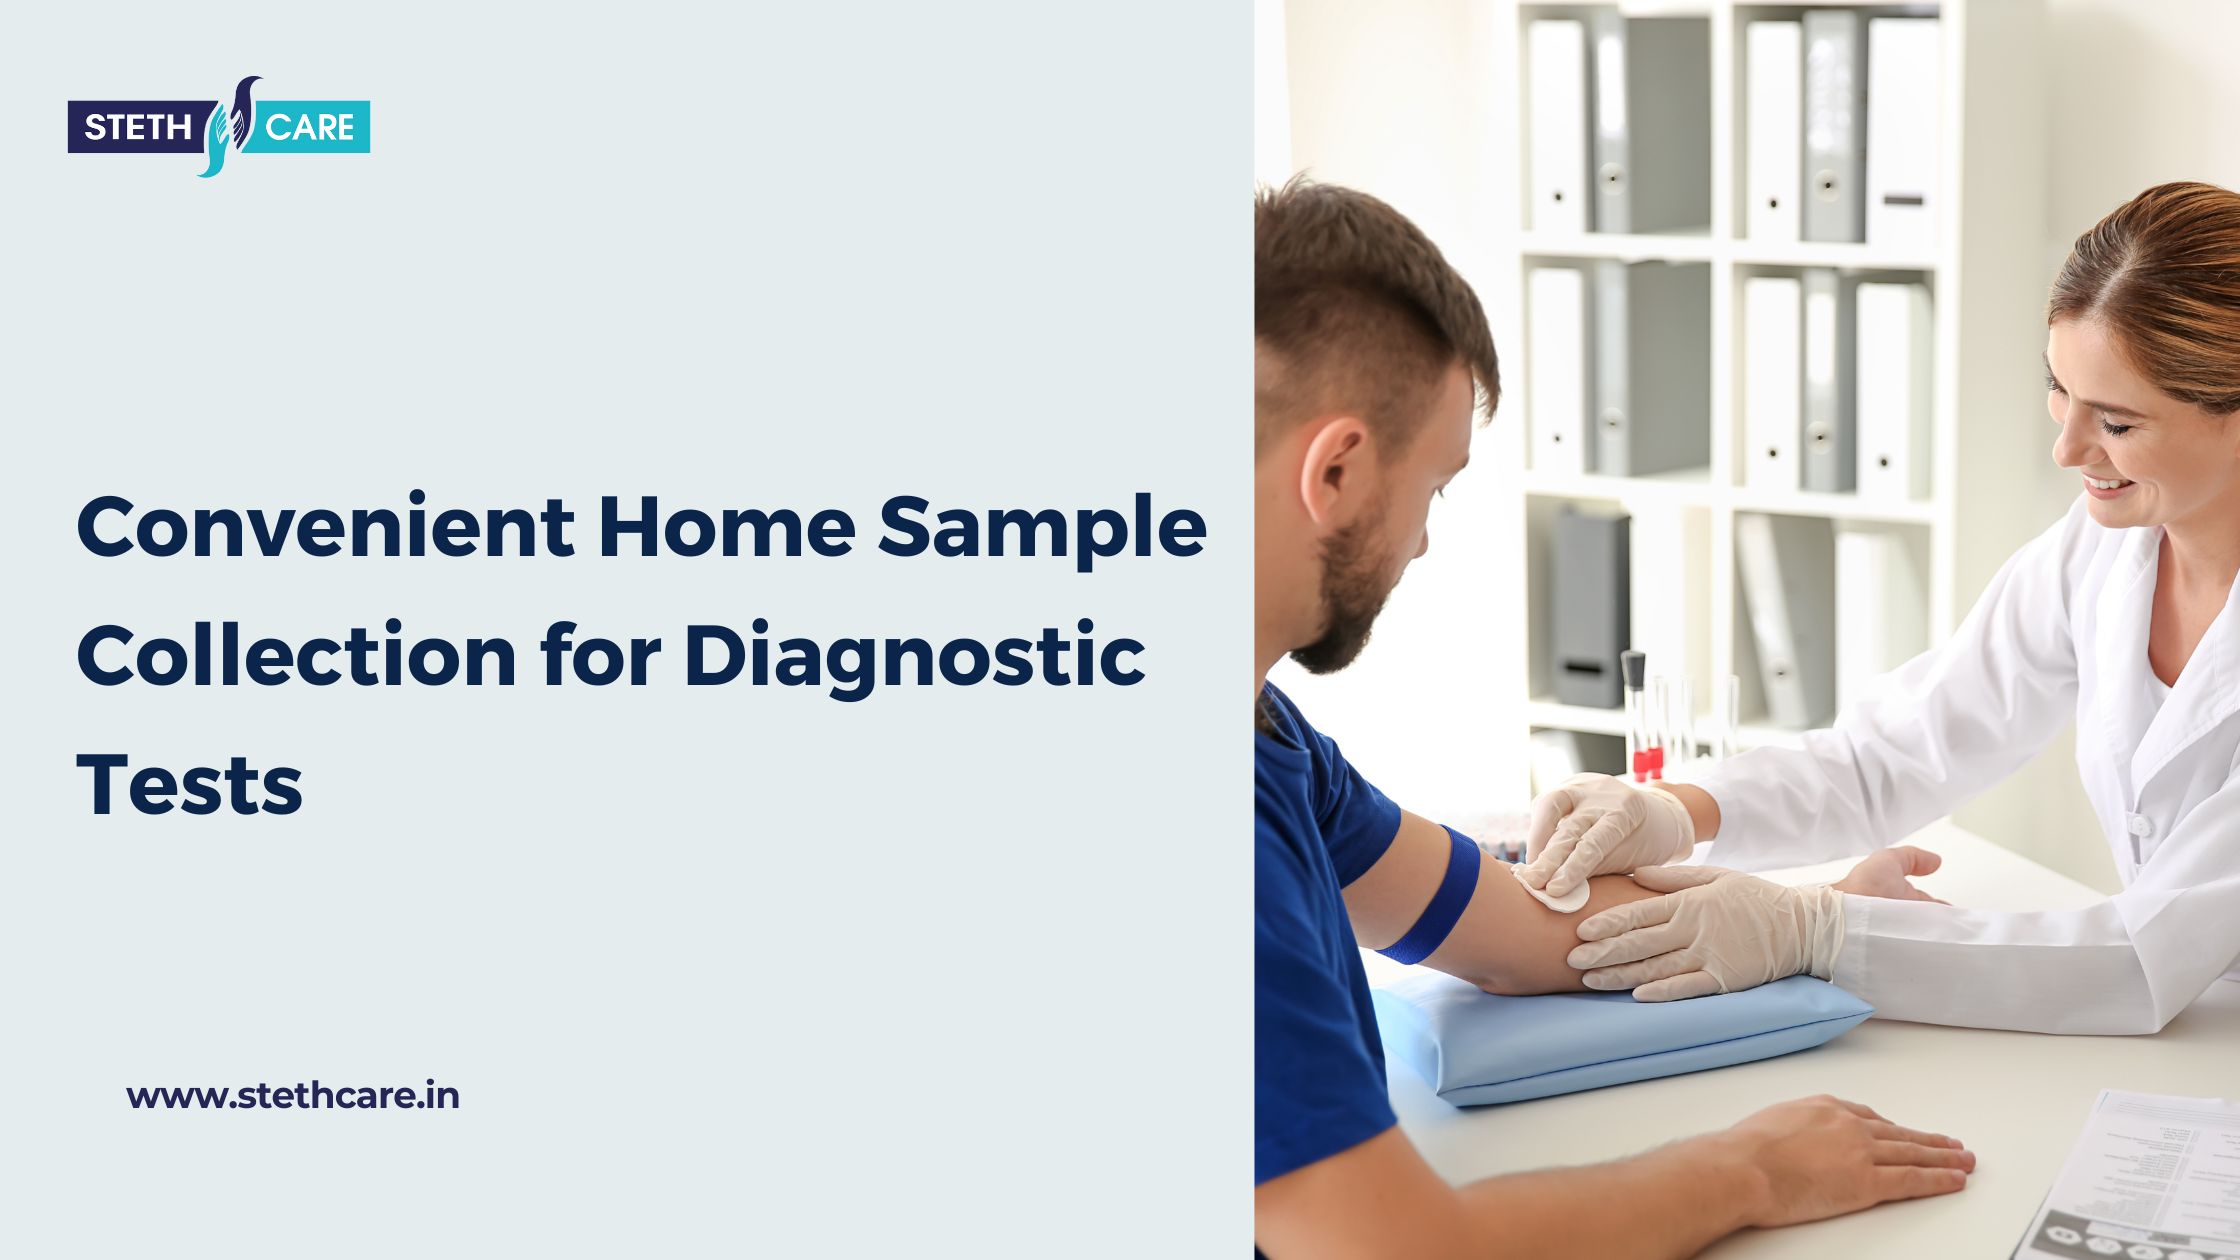 Convenient Home Sample Collection for Diagnostic Tests